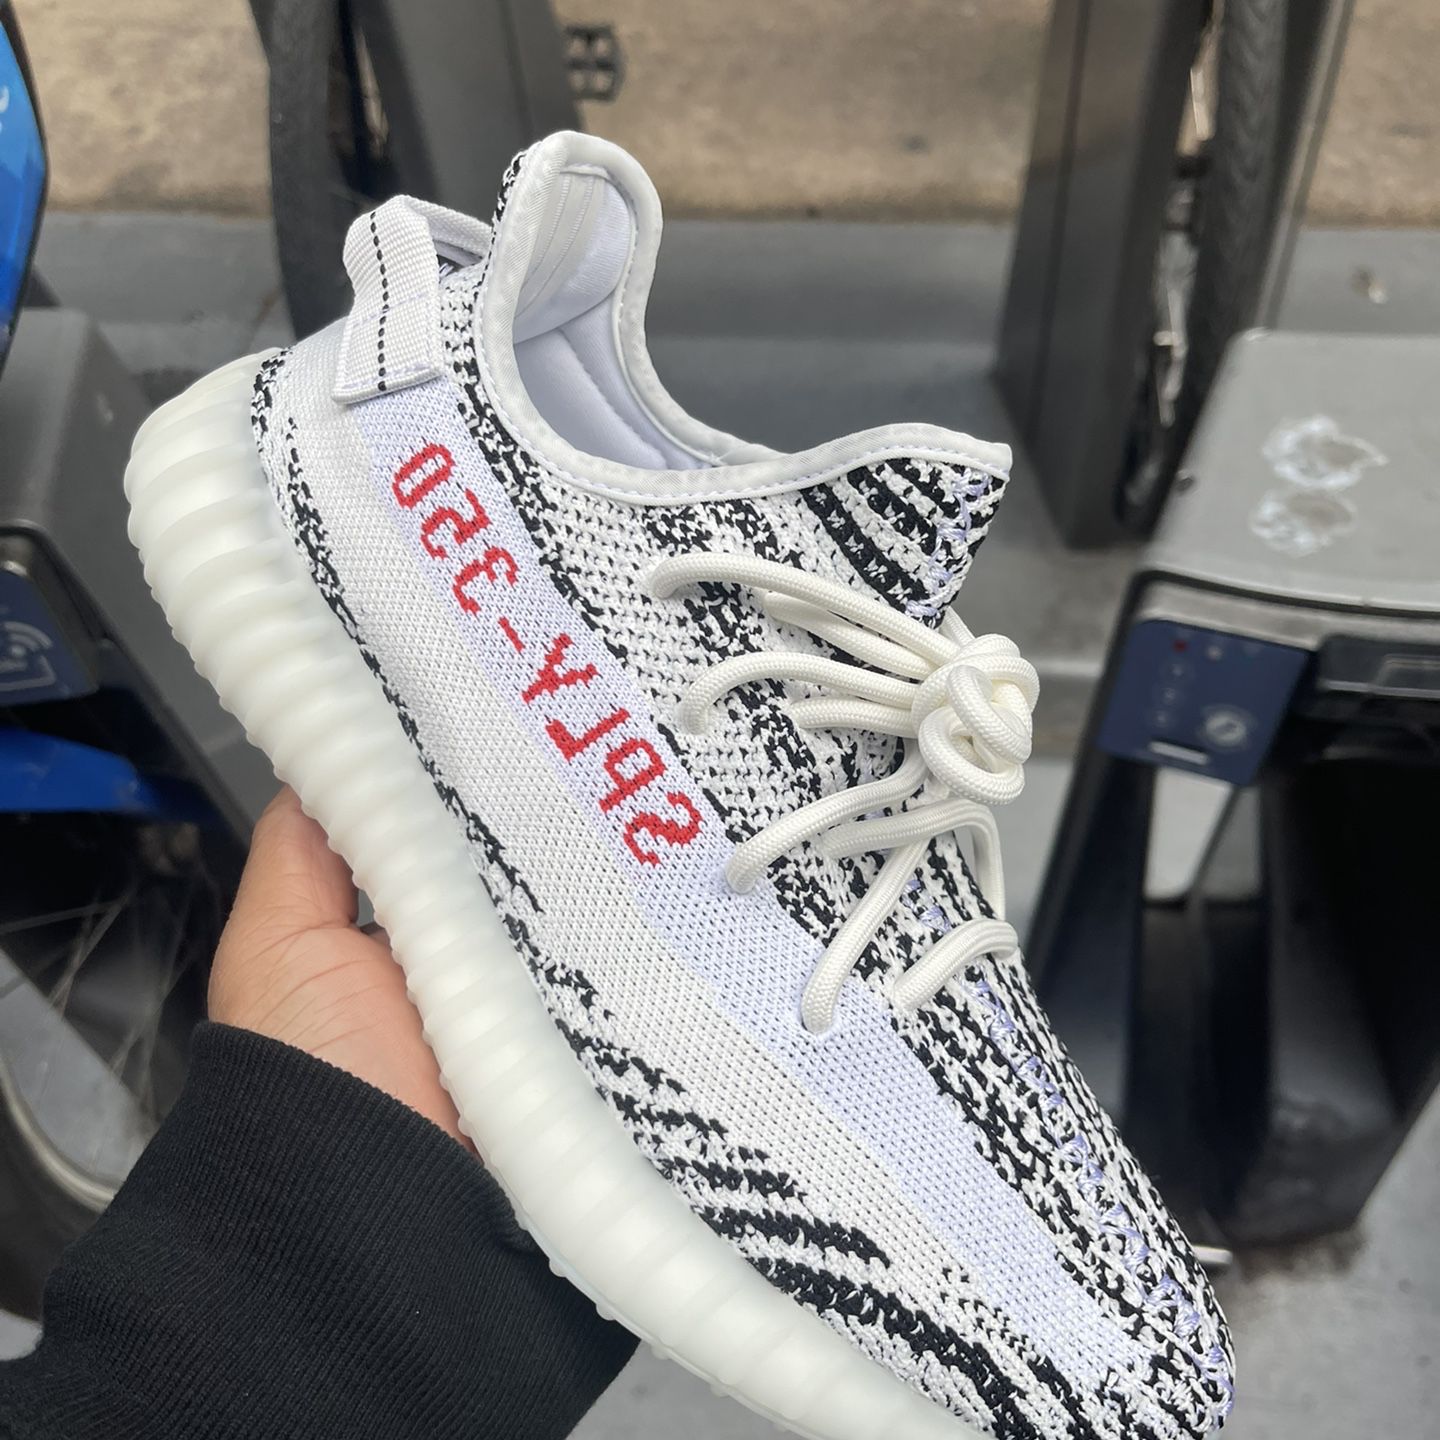 Yeezy 350 for Sale in NY